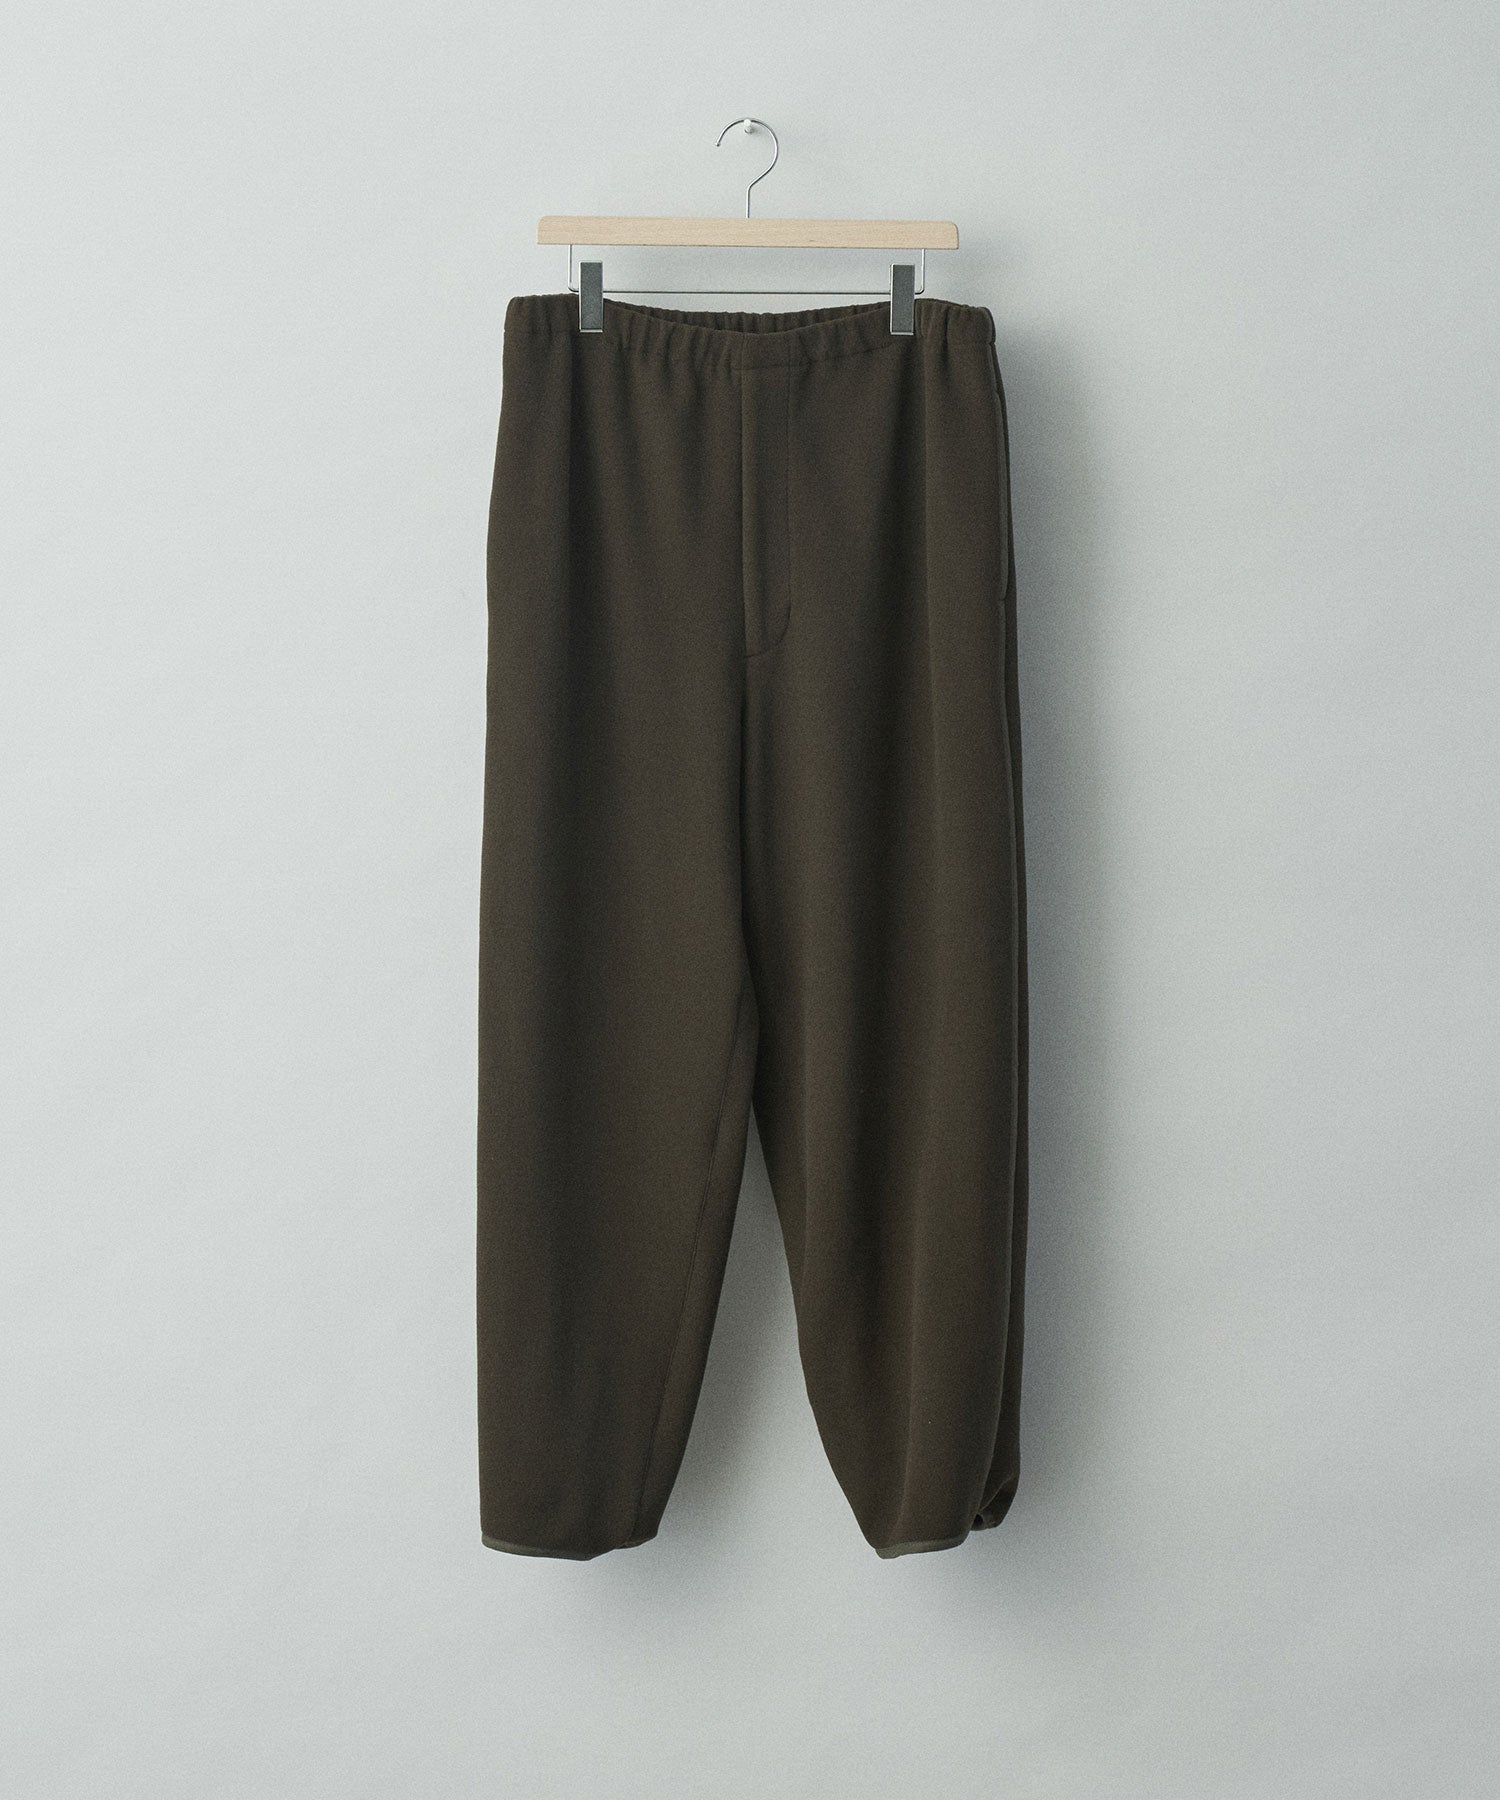 stein】WIDE FLEECE EASY TROUSERS - MILITARY KHAKI | 公式通販サイト ...